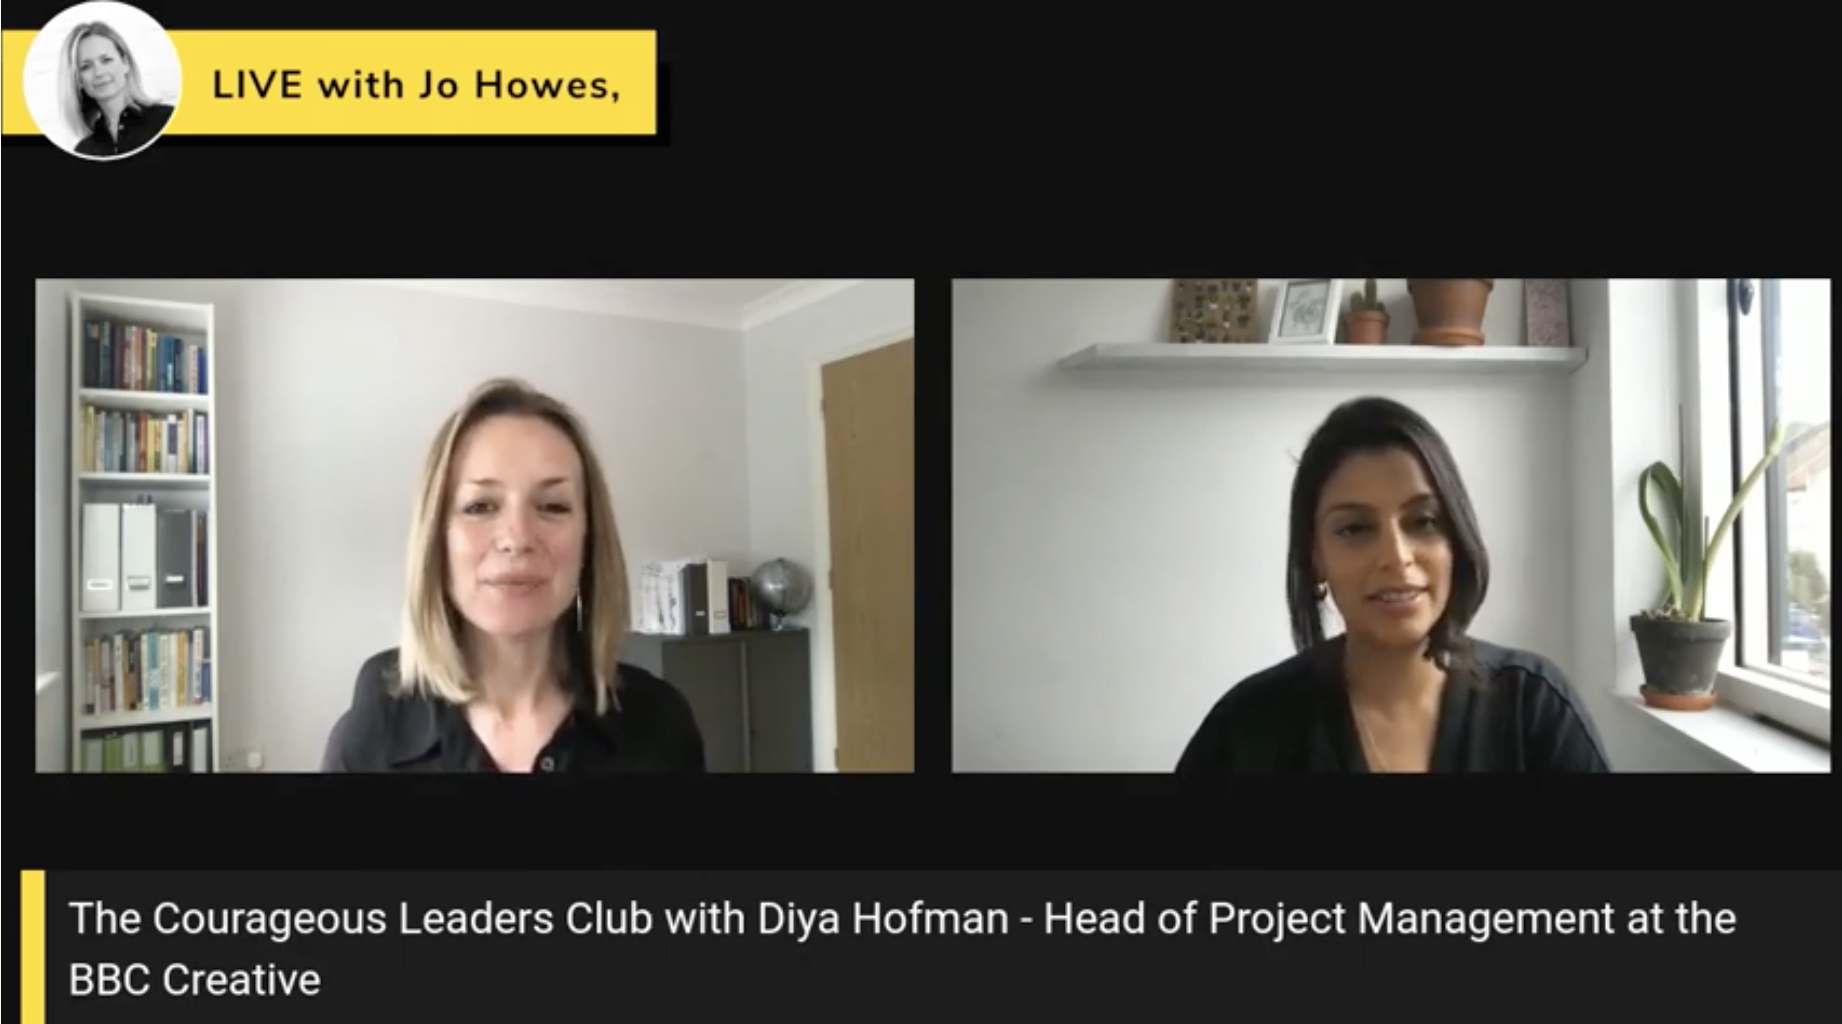 The Courageous Leaders Club with Diya Hofman, Head of PM at BBC Creative